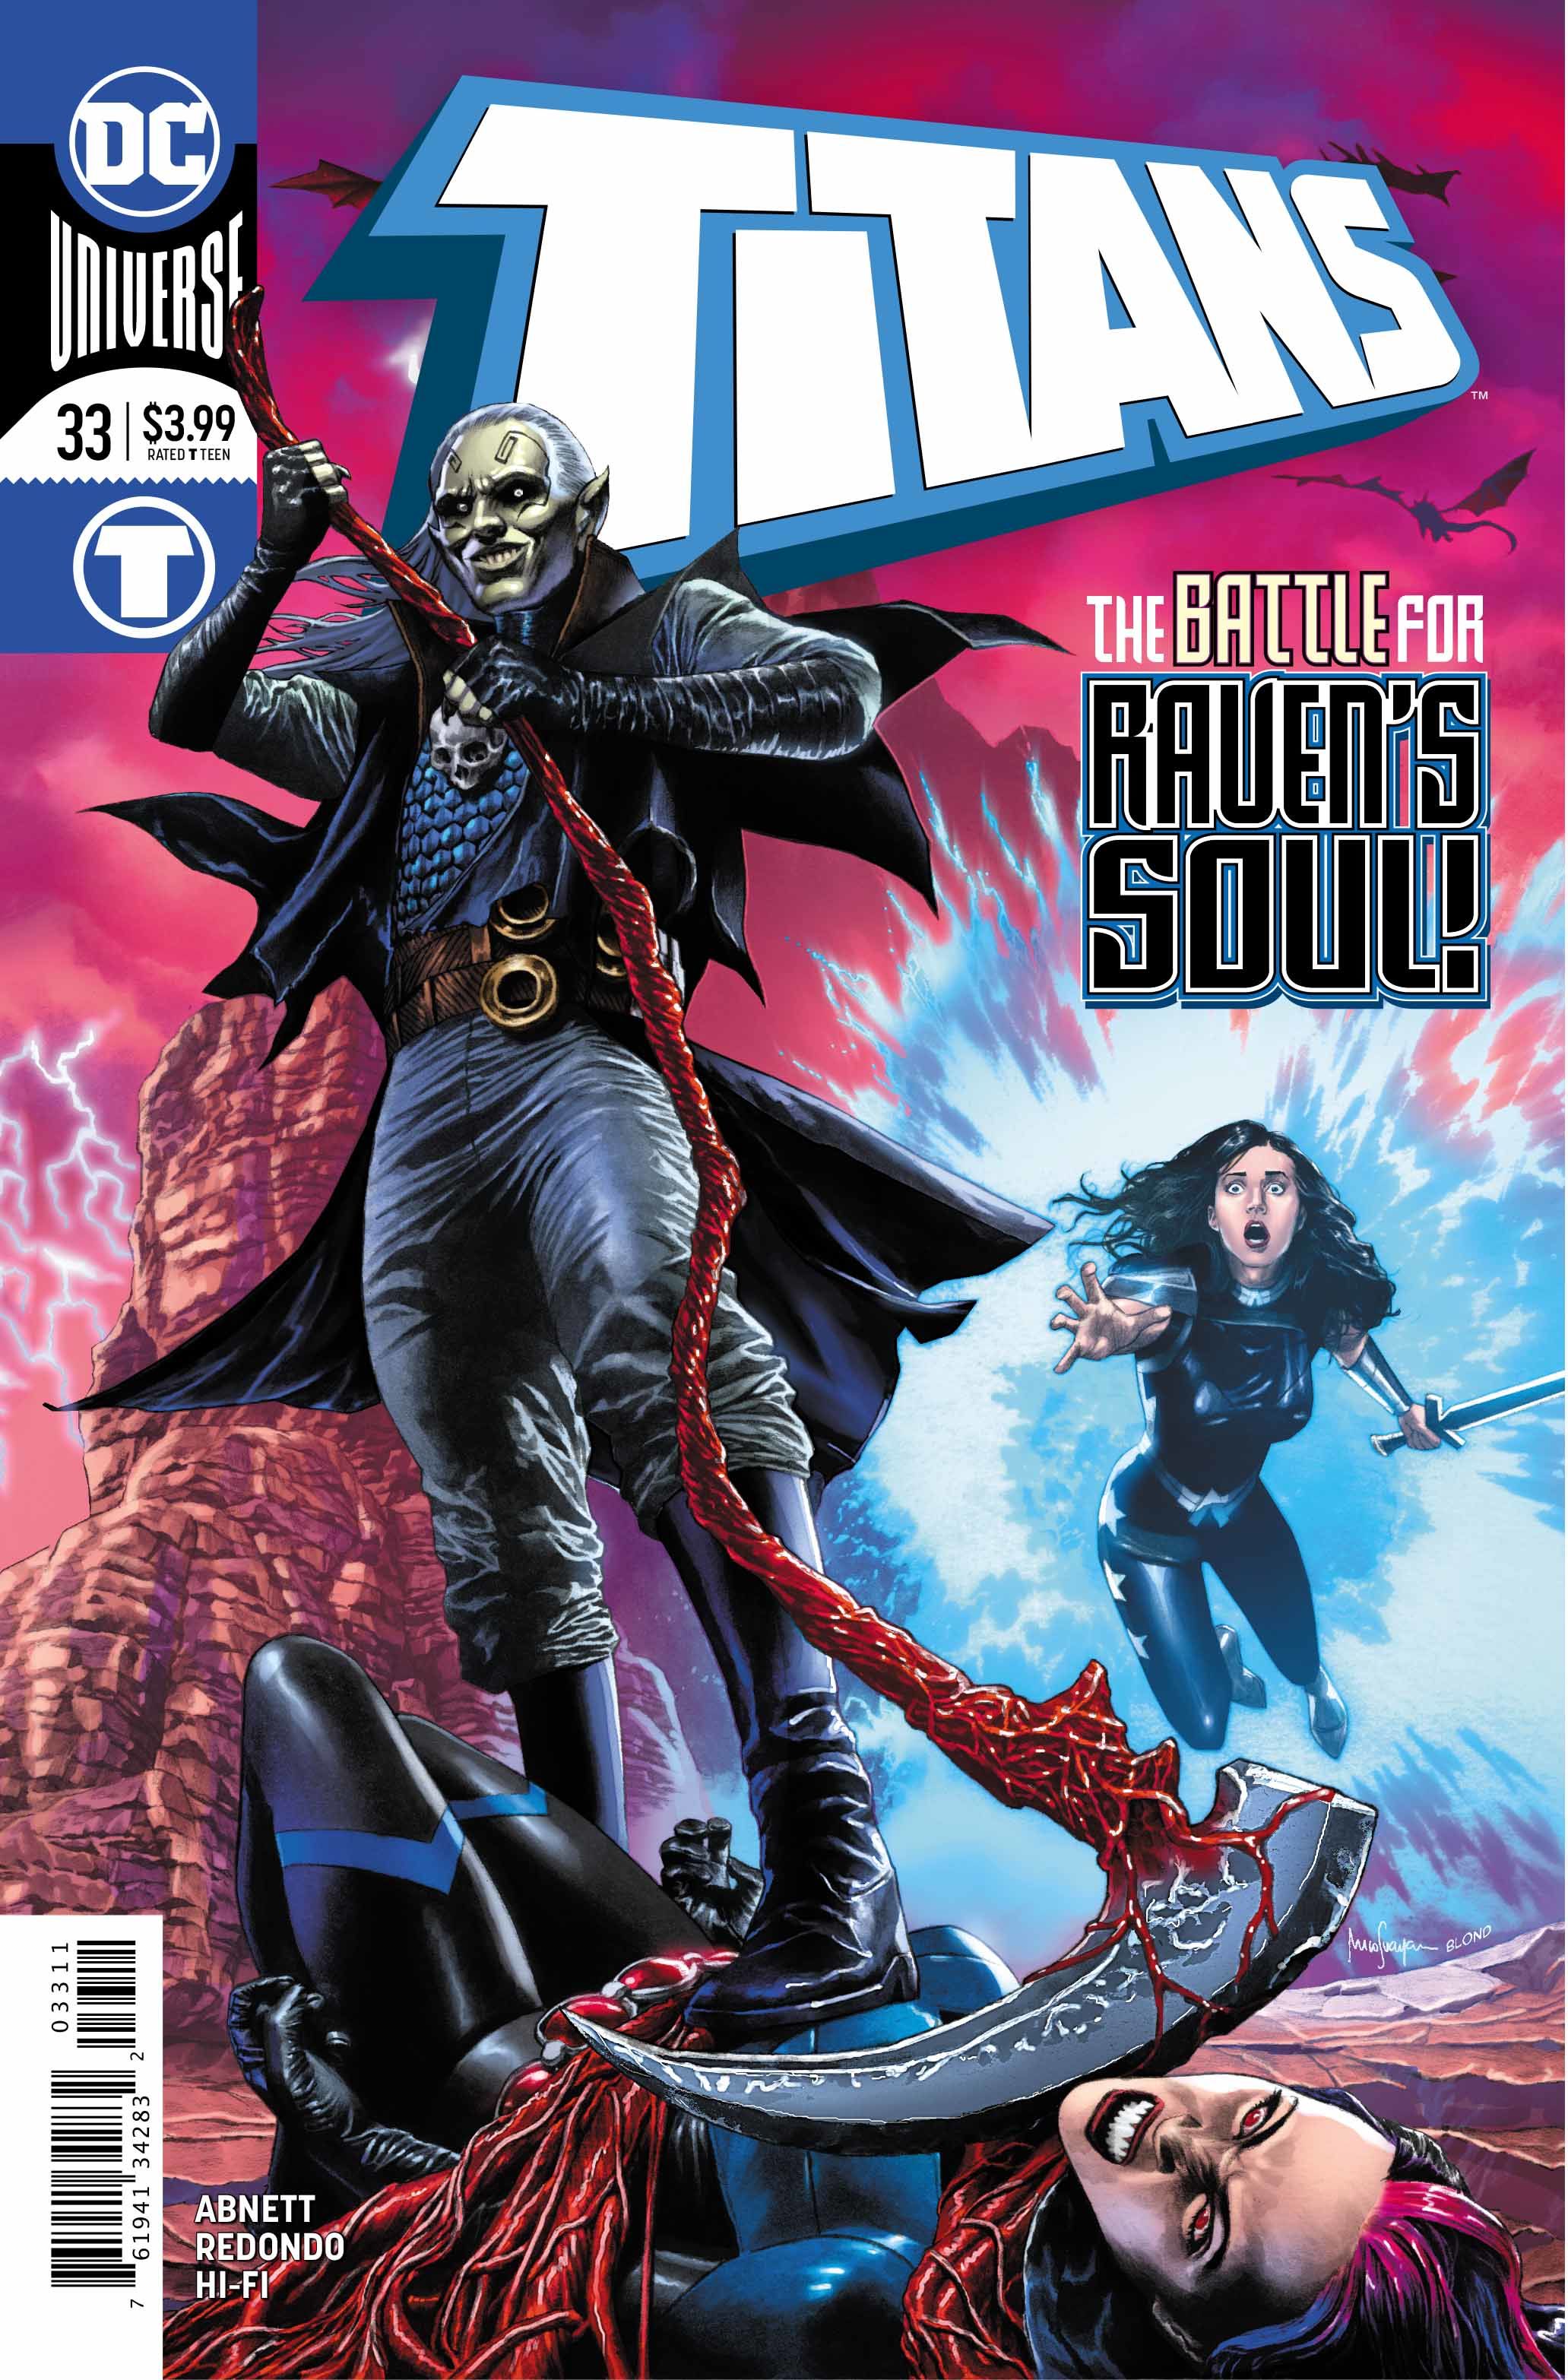 Check out this first look preview of Titans #33 as the team tries to get  Raven's Soul-Self back and battle Mother Blood